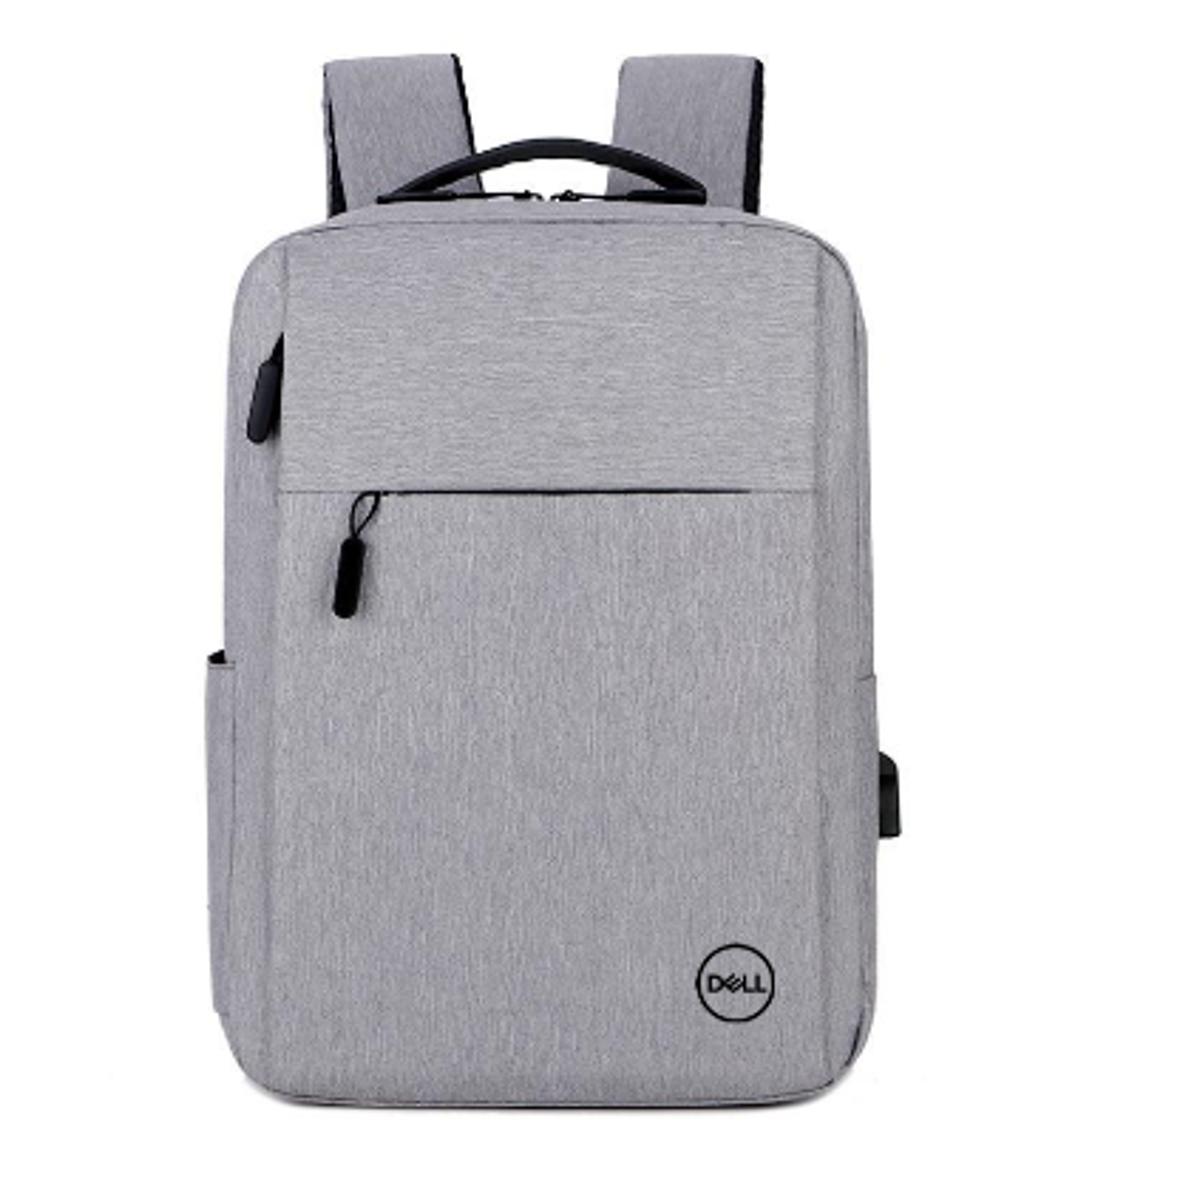 15 Inch Laptop Tote | vlr.eng.br